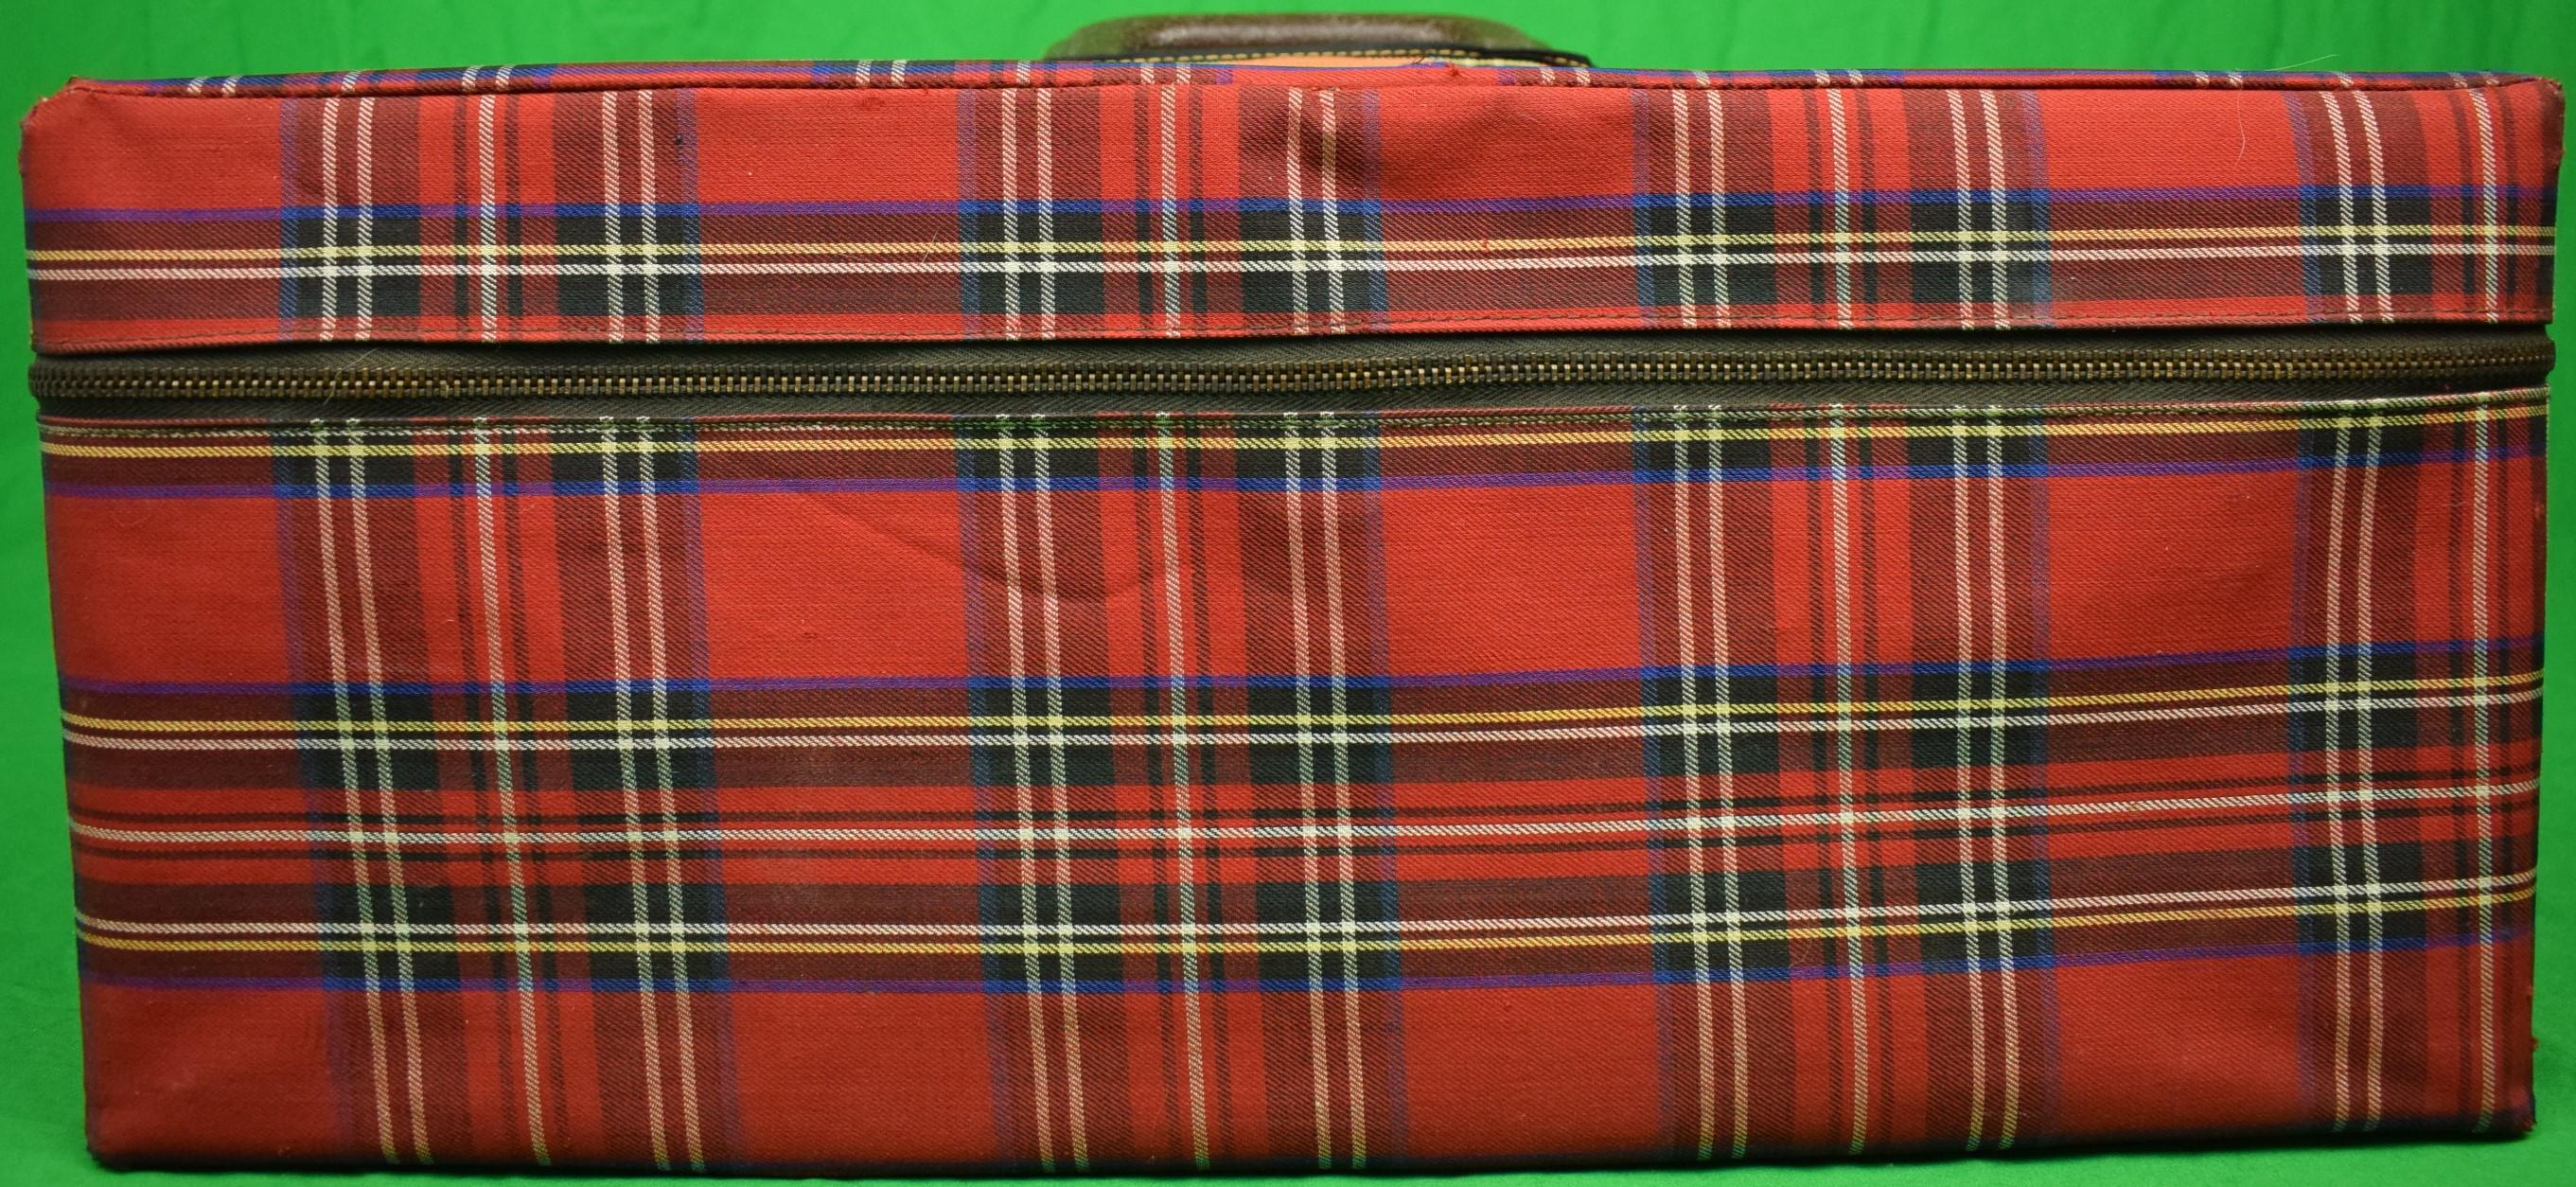 Abercrombie & Fitch Deluxe Mahogany Tackle Box w/ Royal Stewart Tartan Cover For Sale 10